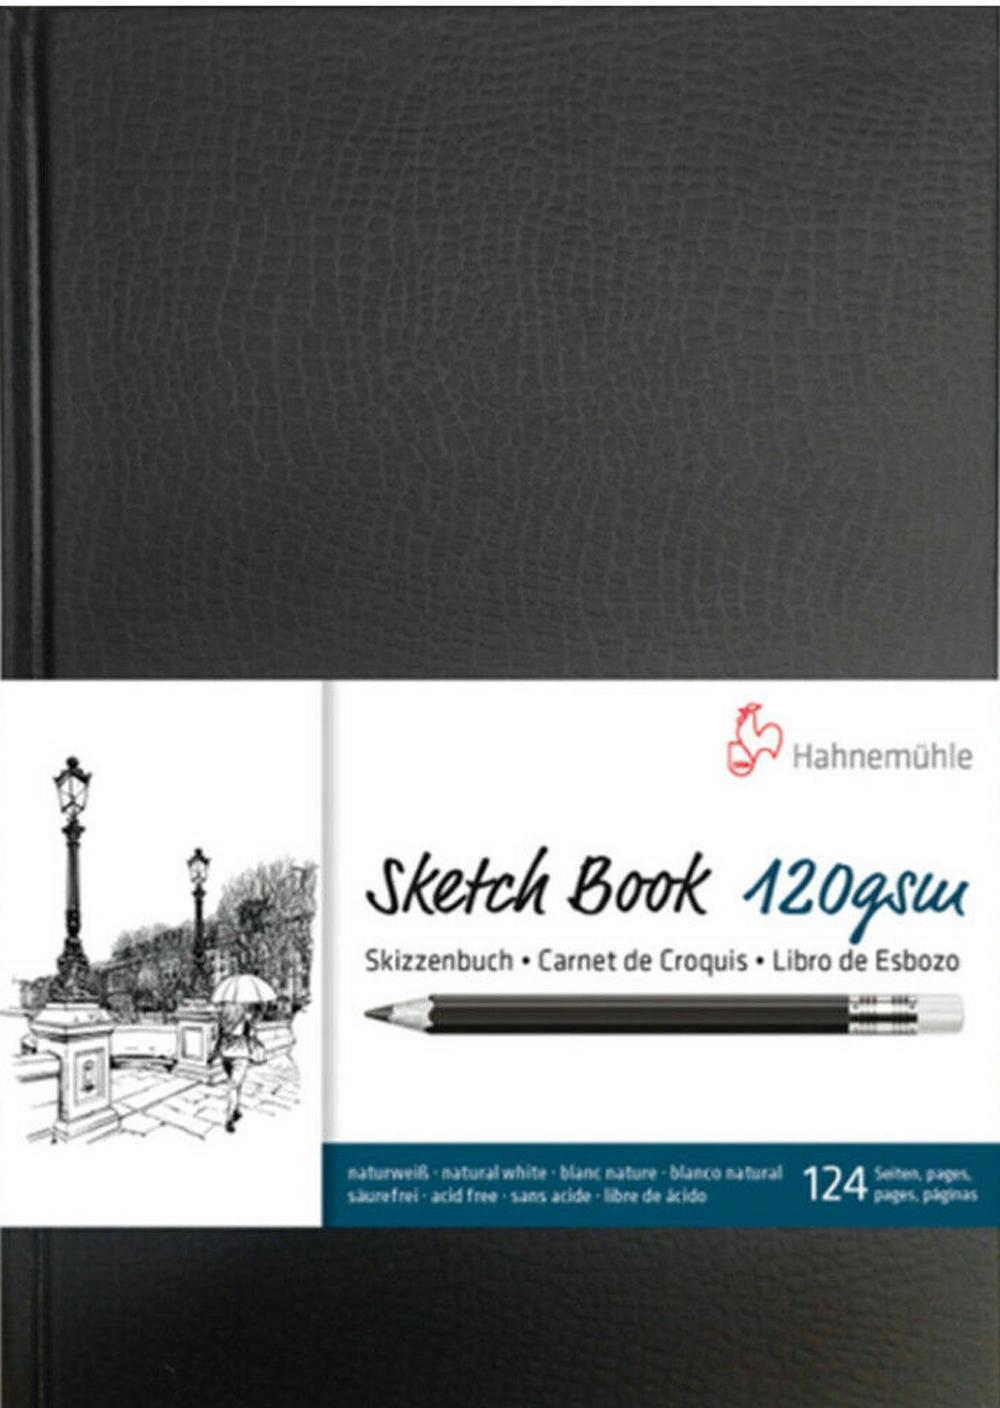 Hahnemuhle Sketch Diary A4